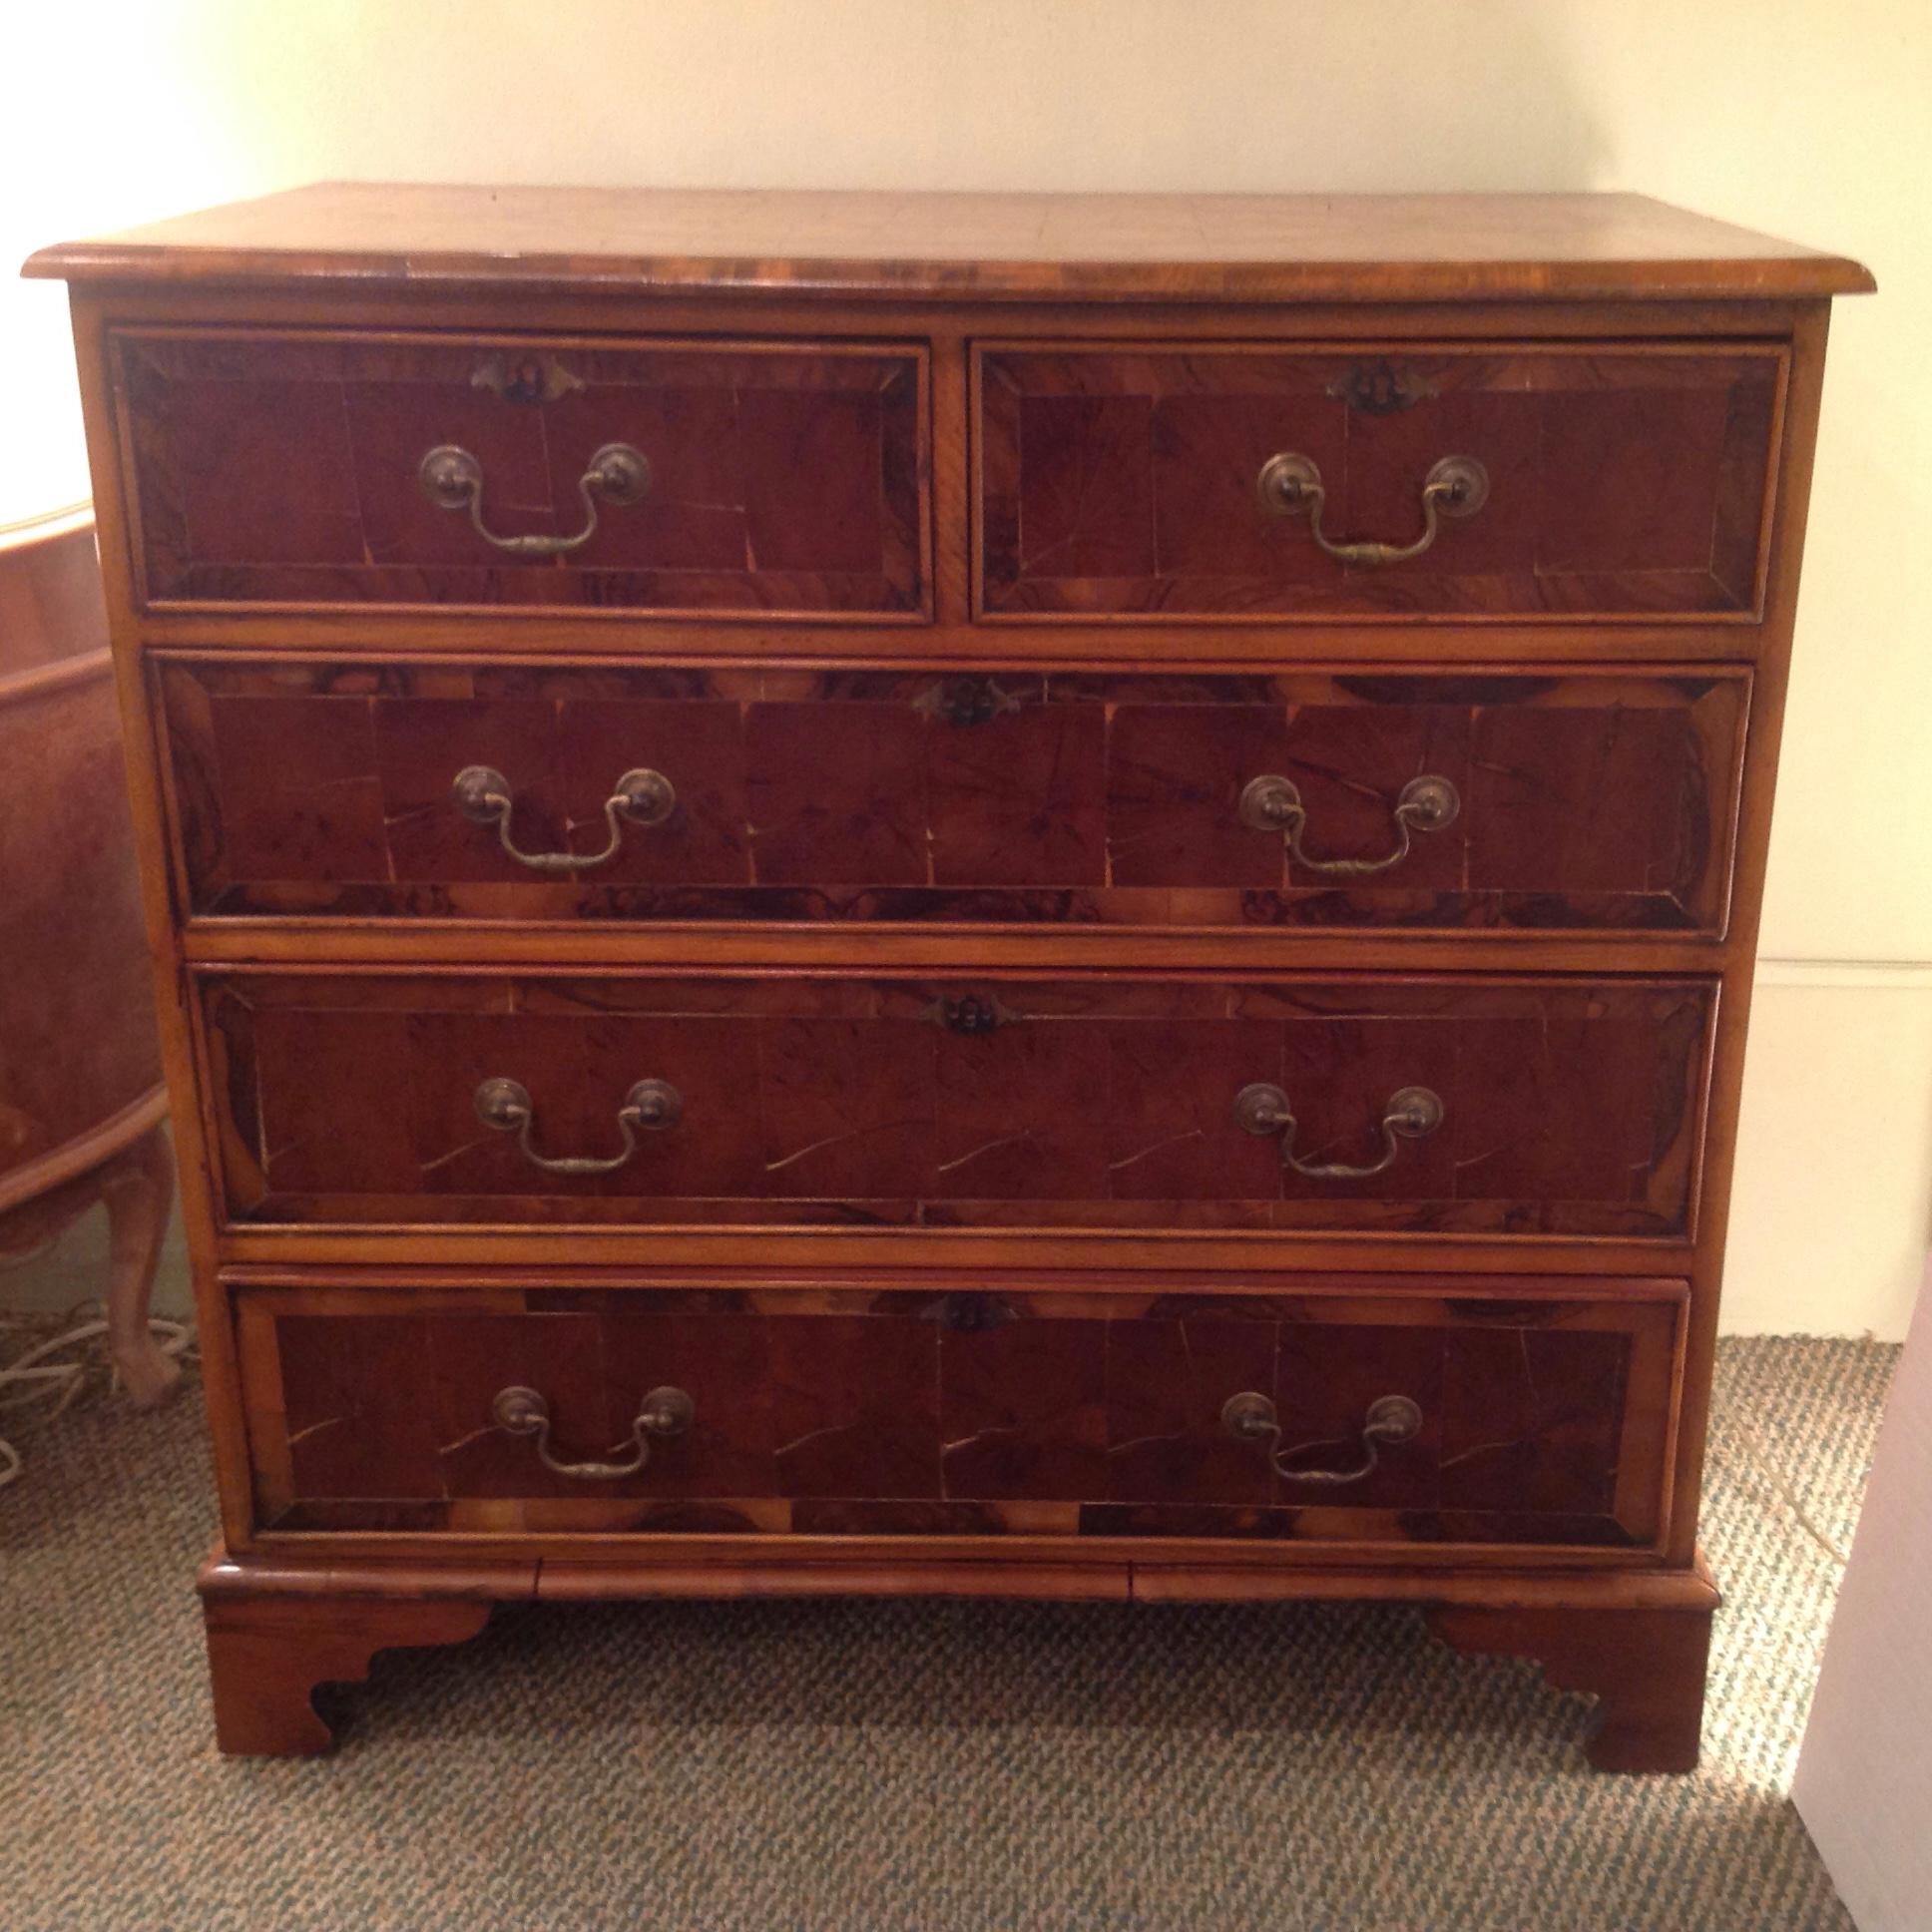 A superb example fashioned with 5 drawers. Exquisite 